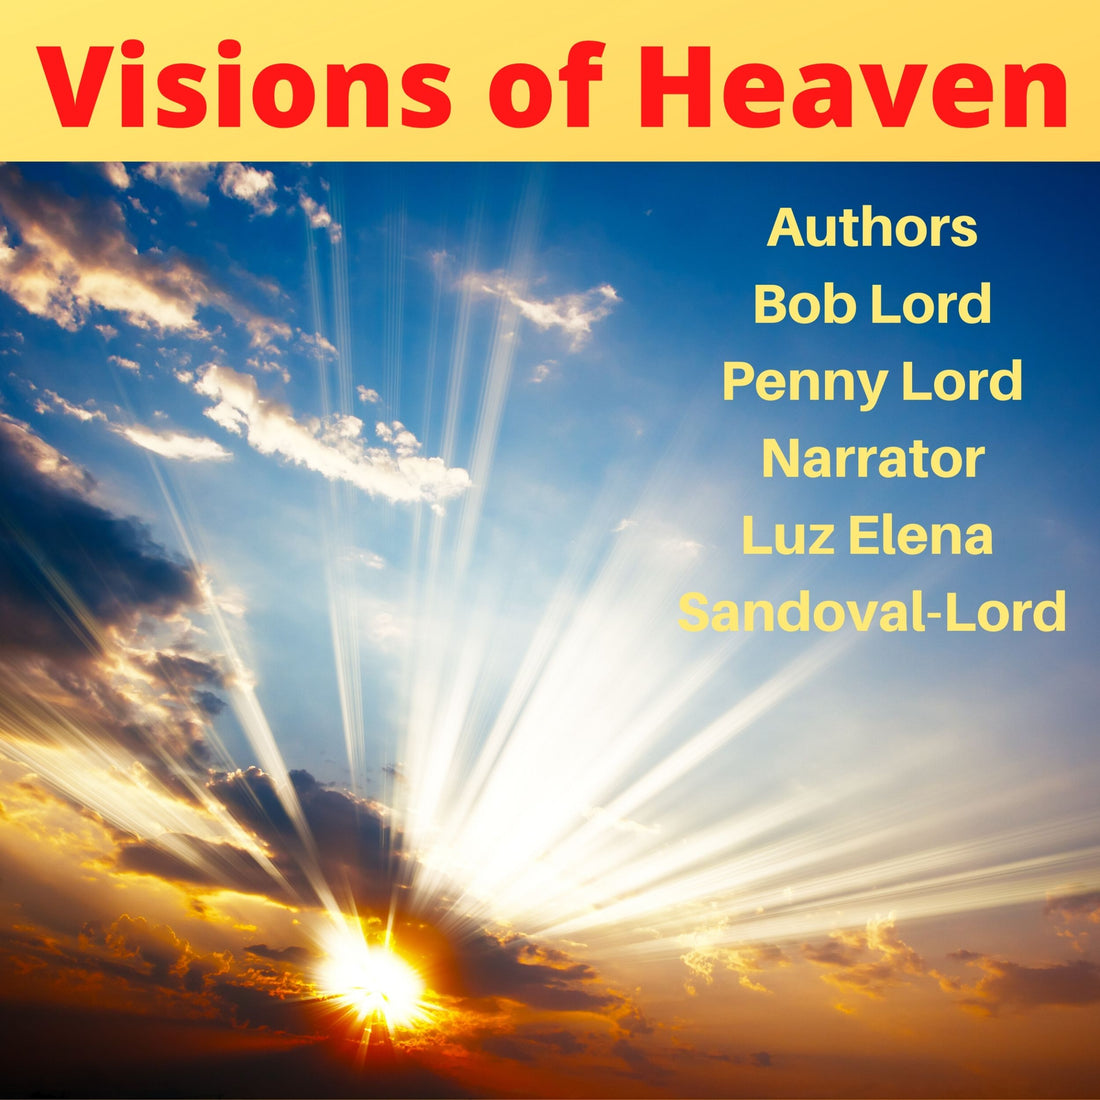 Visions of Heaven Experienced by the Saints